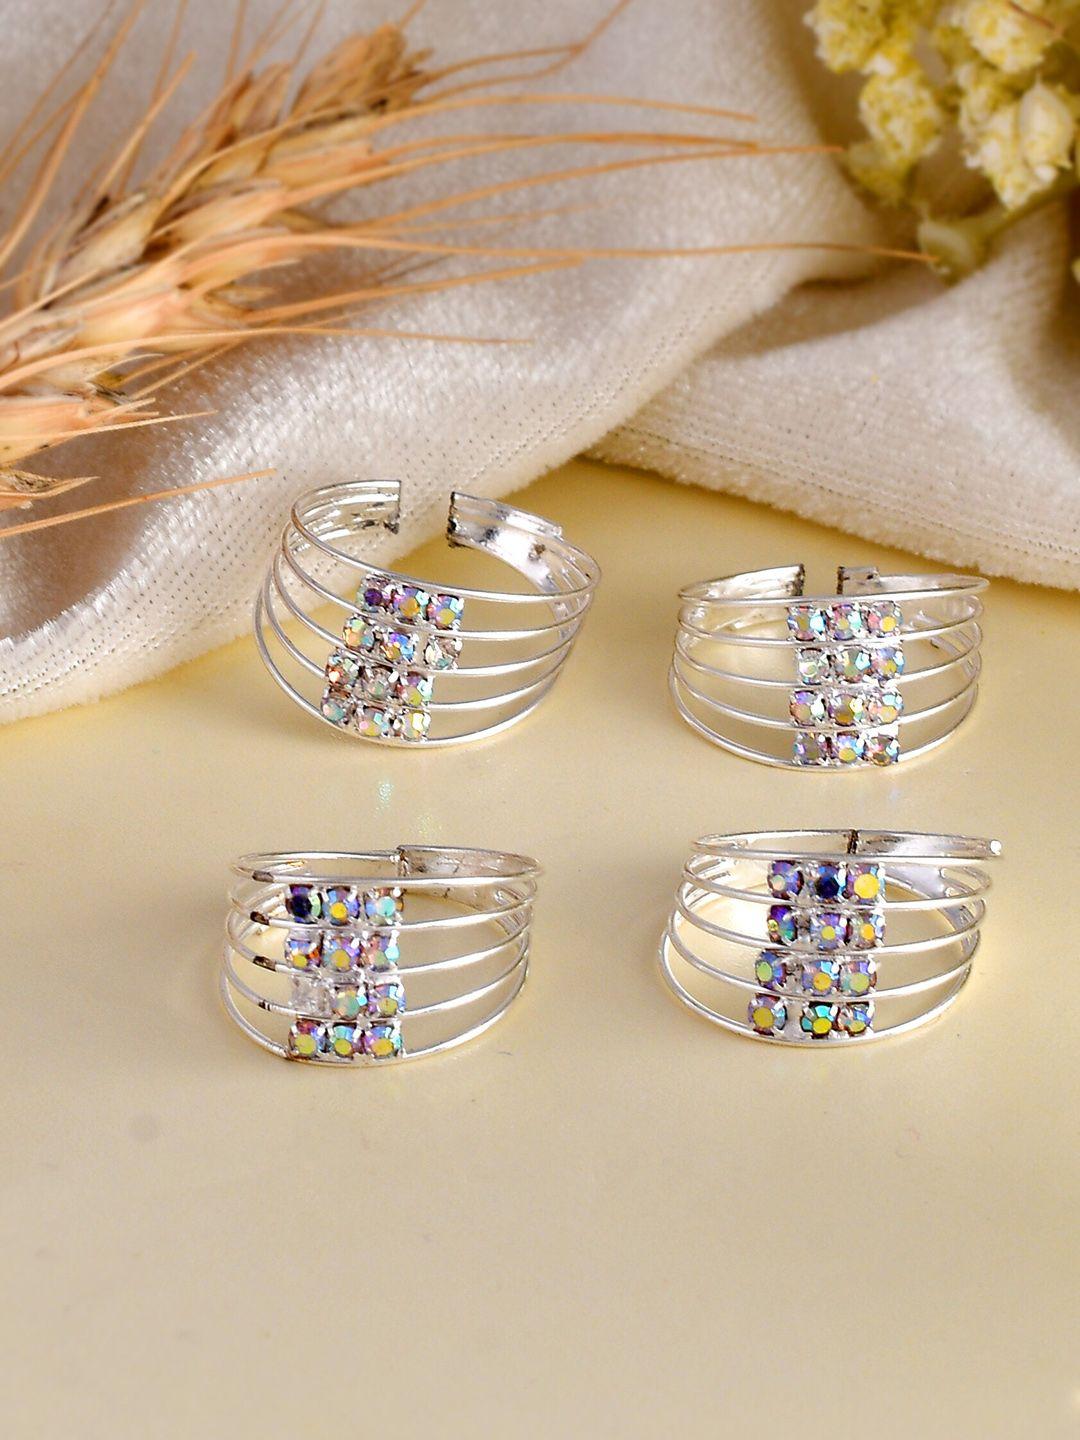 silvermerc designs set of 4 silver-plated cz-studded toe rings